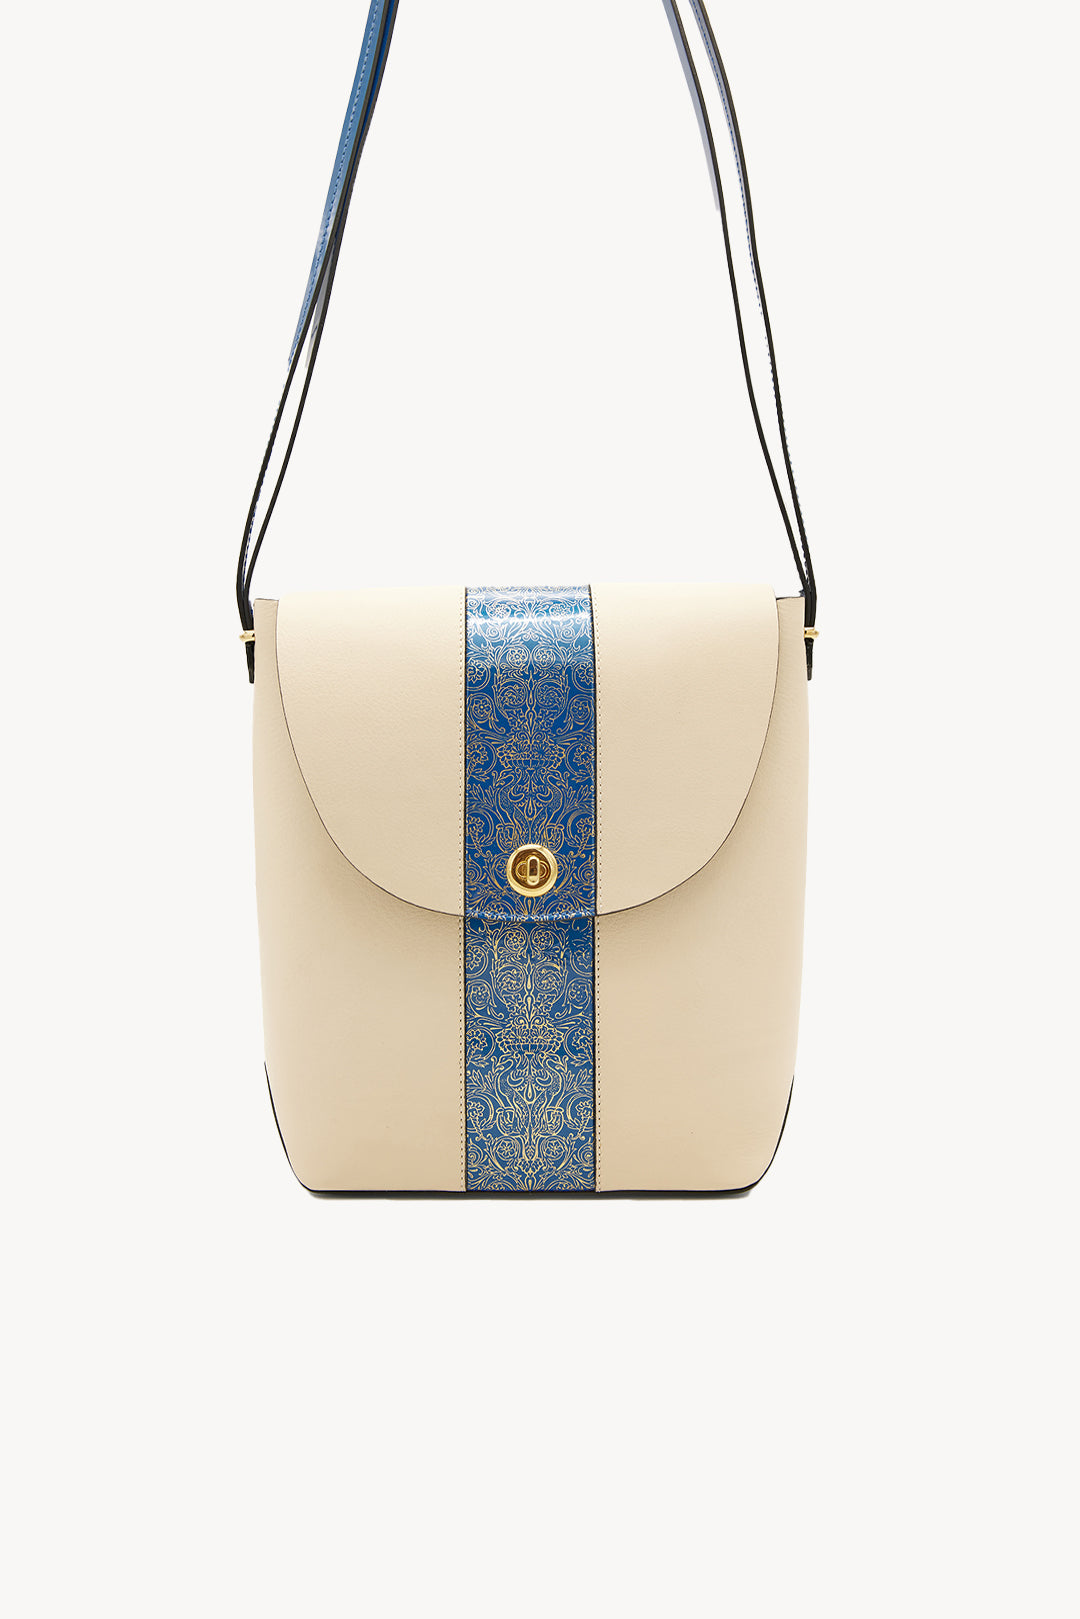 Shopping bag with shoulder strap - Ivory and Blue